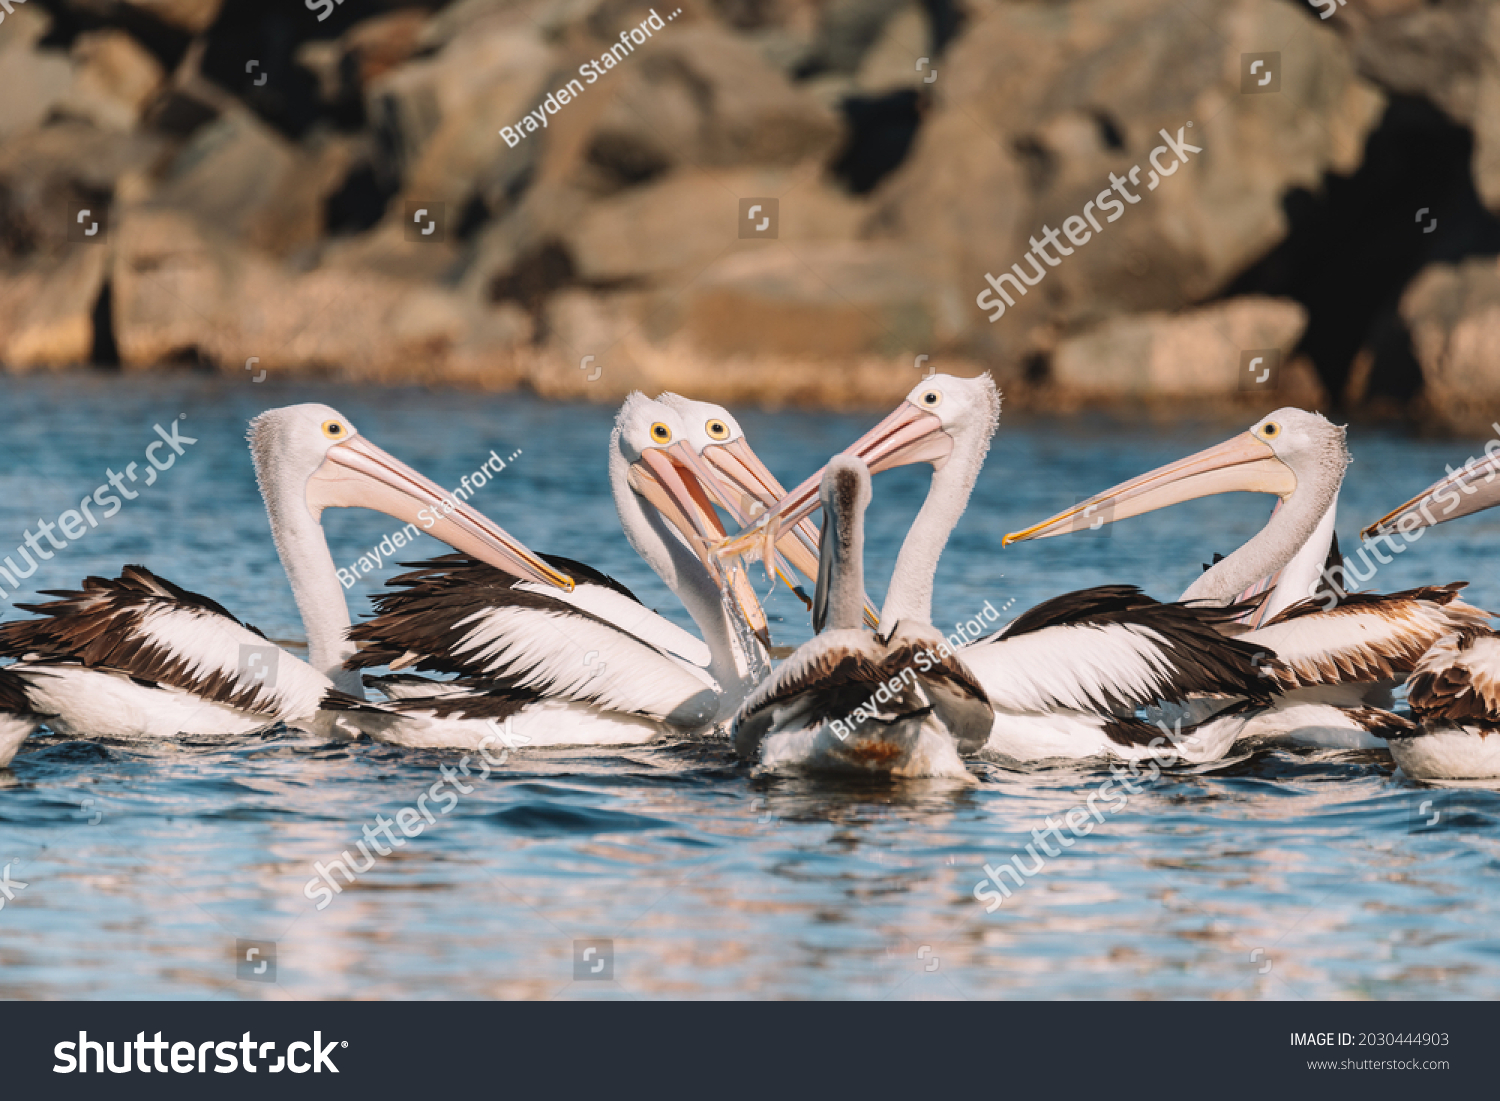 Group of Pelicans fighting over a fish at a harbour. #2030444903